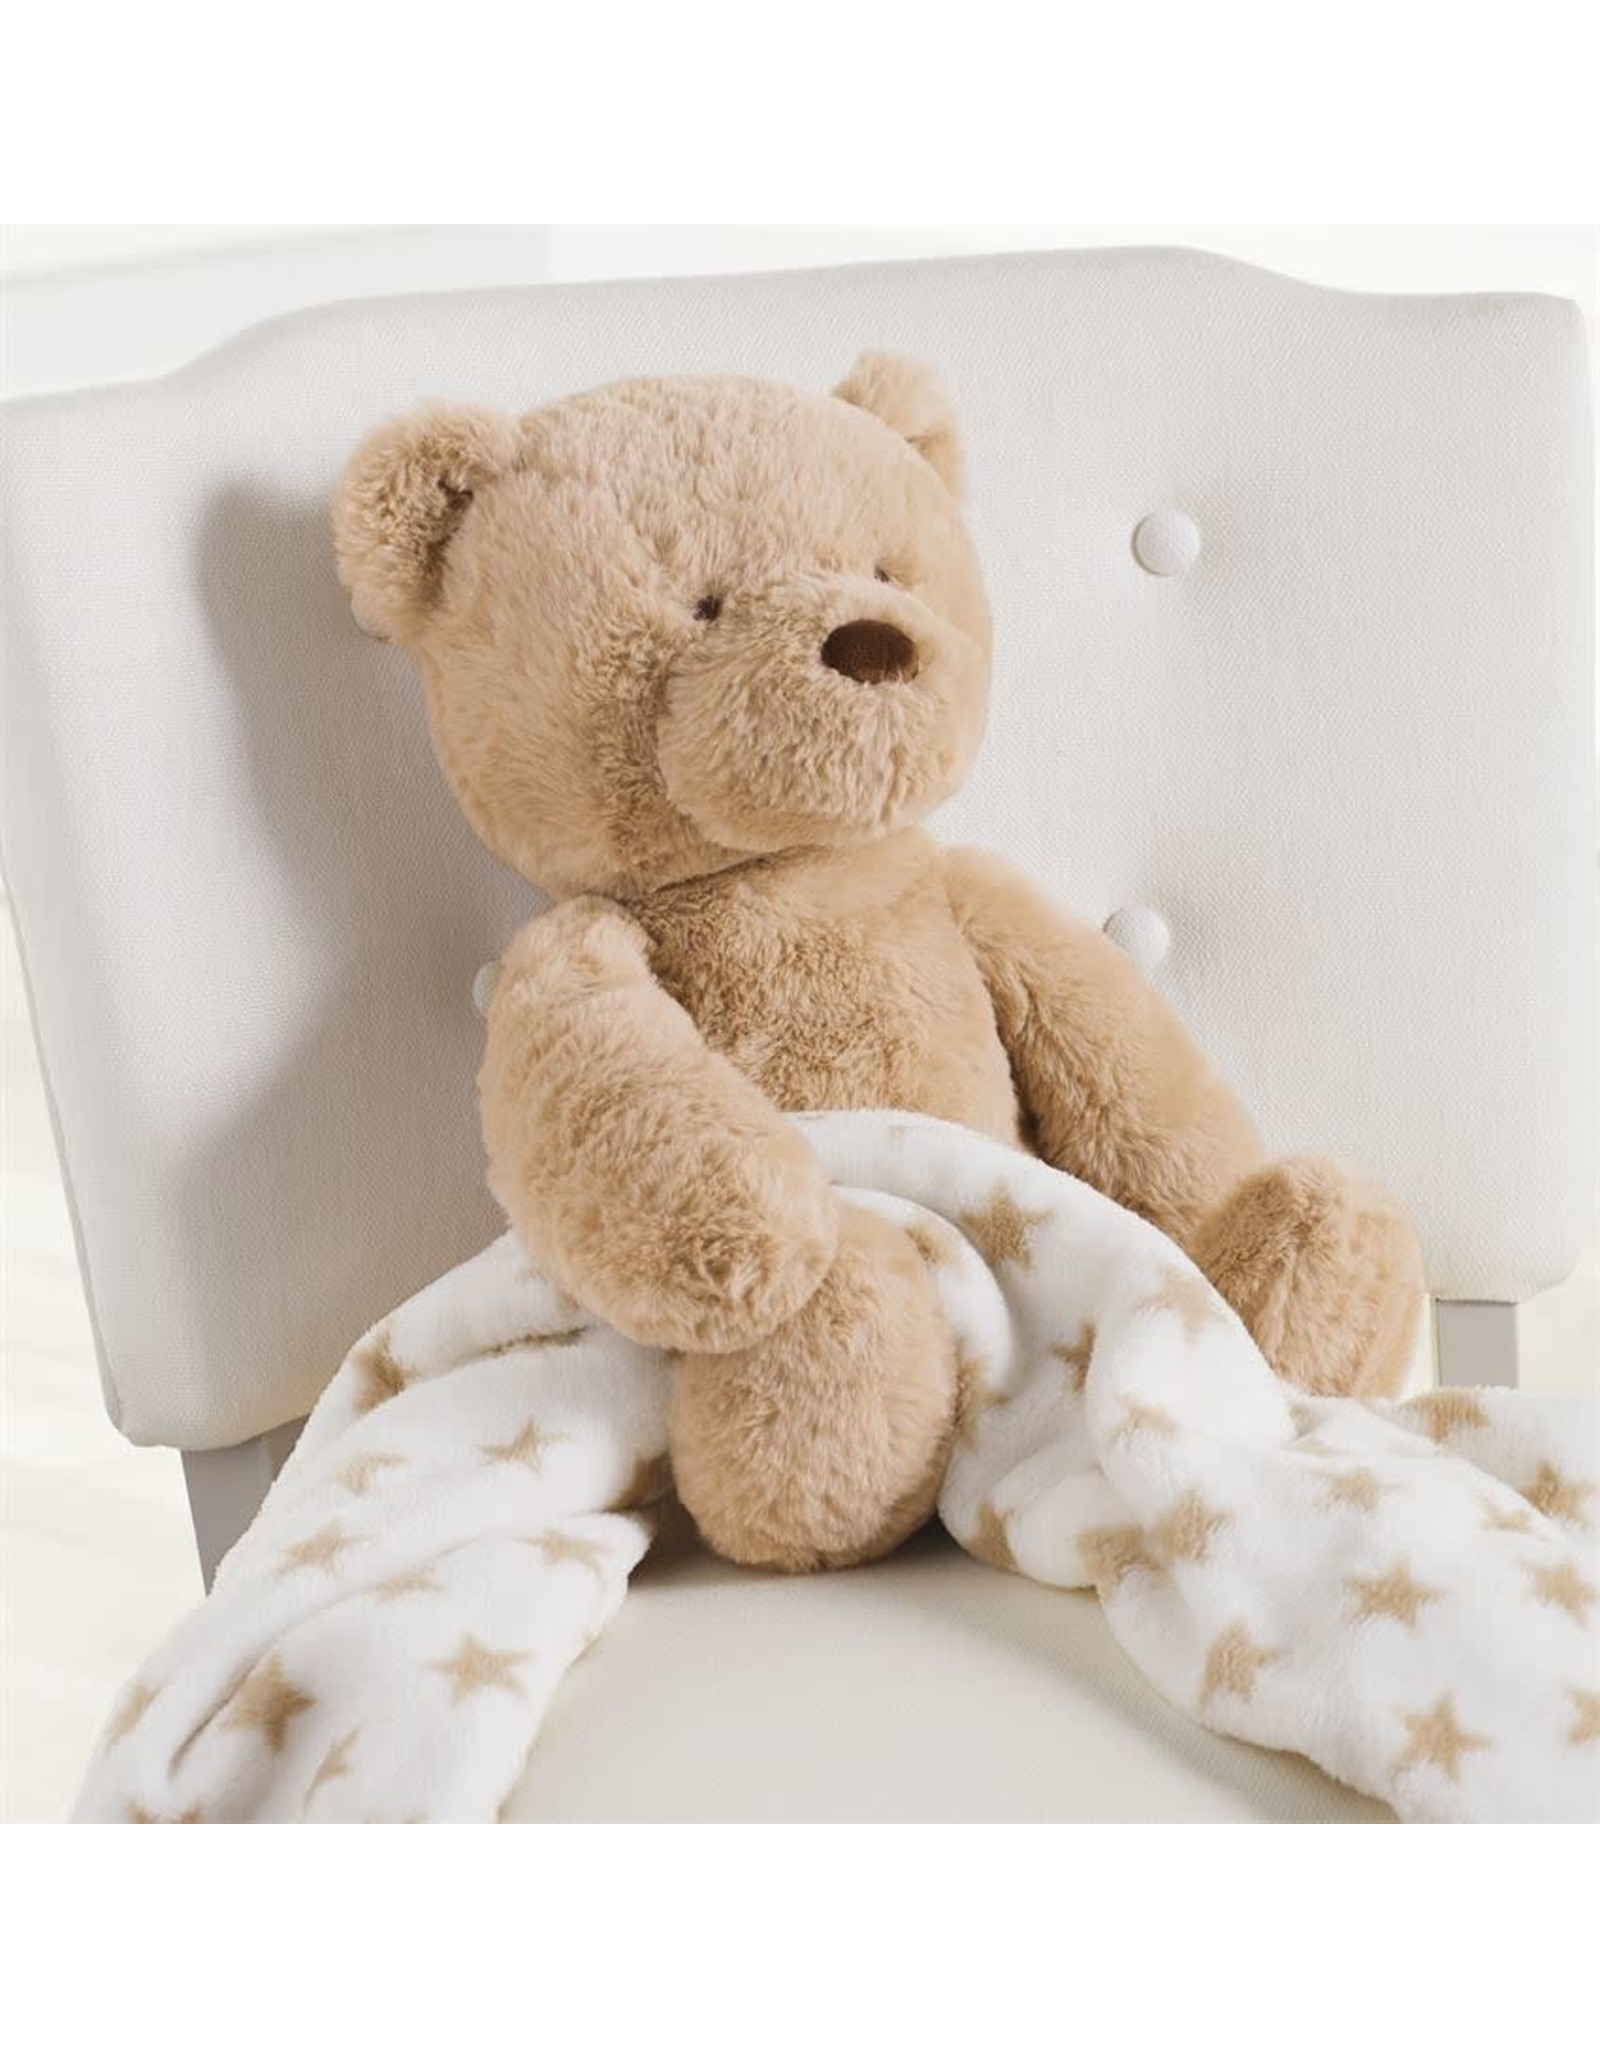 Mud Pie New Baby Gifts Plush Teddy Bear With Baby Blanket